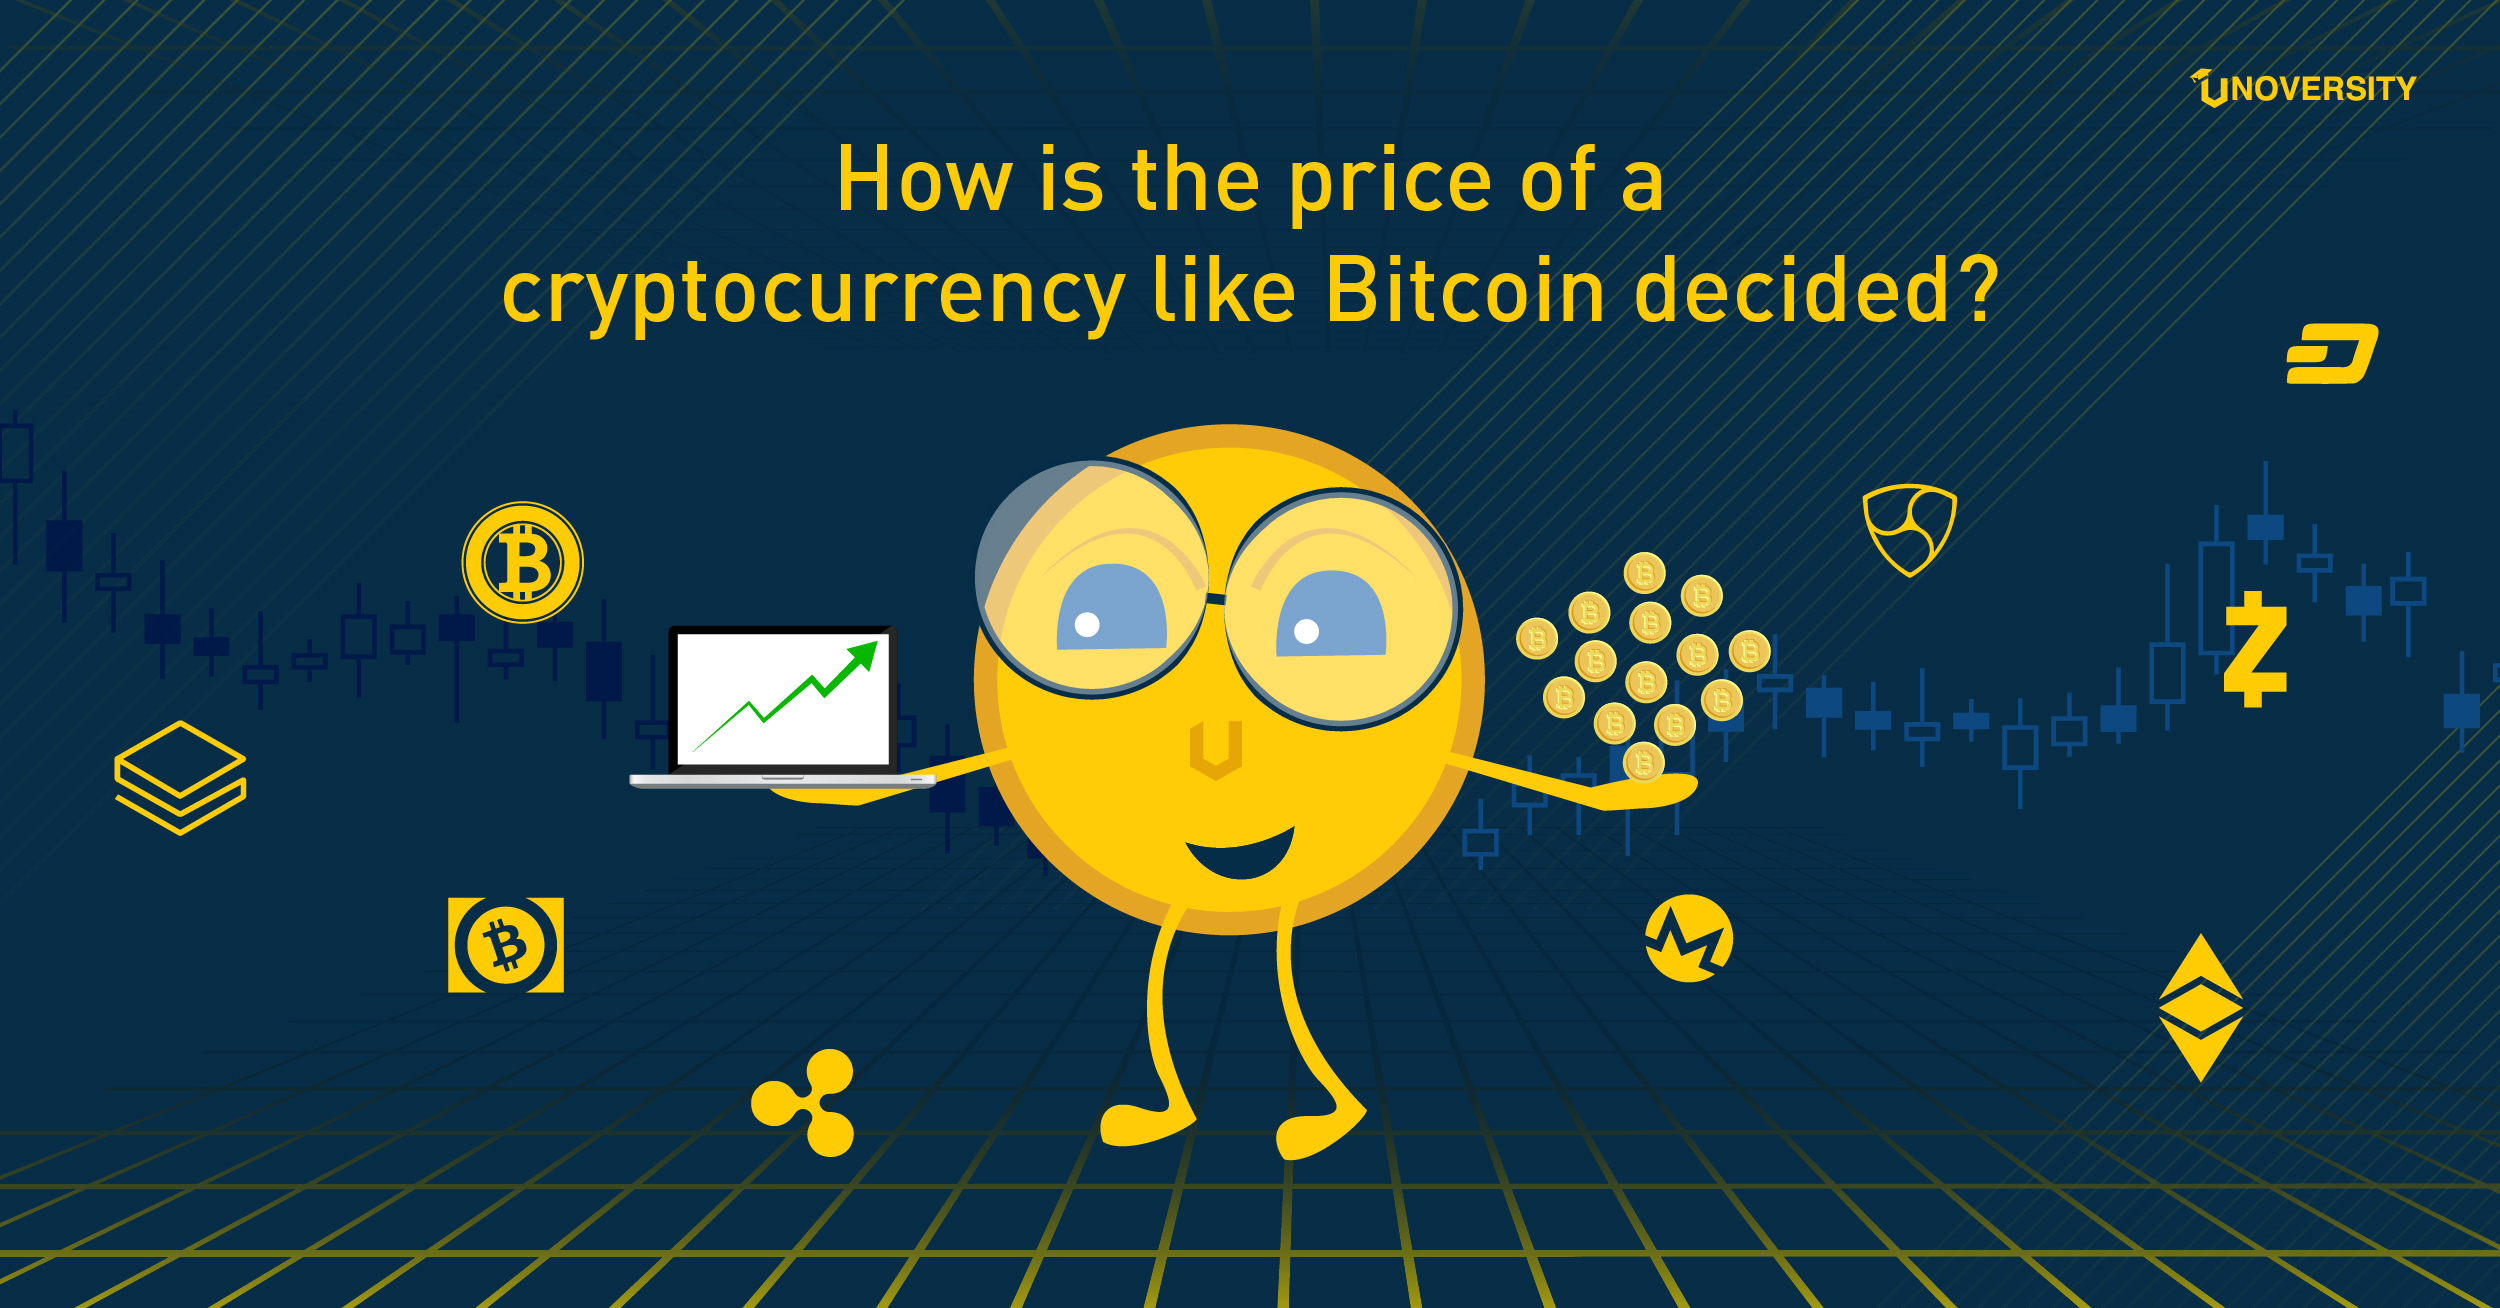 How Is The Price Of A Cryptocurrency Like Bitcoin Decided Unoversity - 